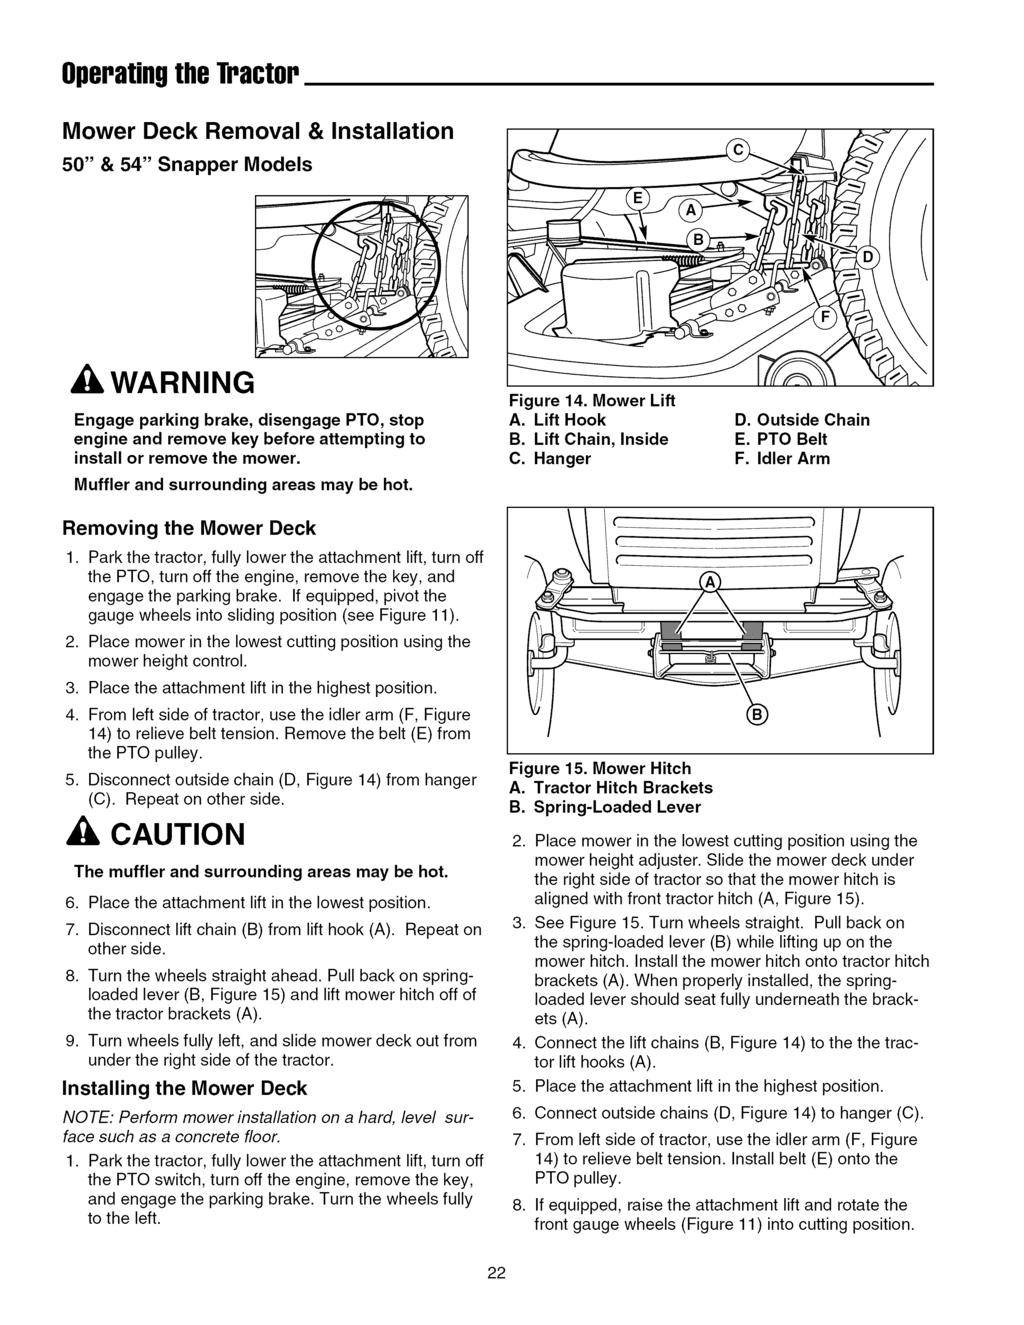 OperatingtheTractor Mower Deck Removal & Installation 50" & 54" Snapper Models WARNING Engage parking brake, disengage PTO, stop engine and remove key before attempting to install or remove the mower.